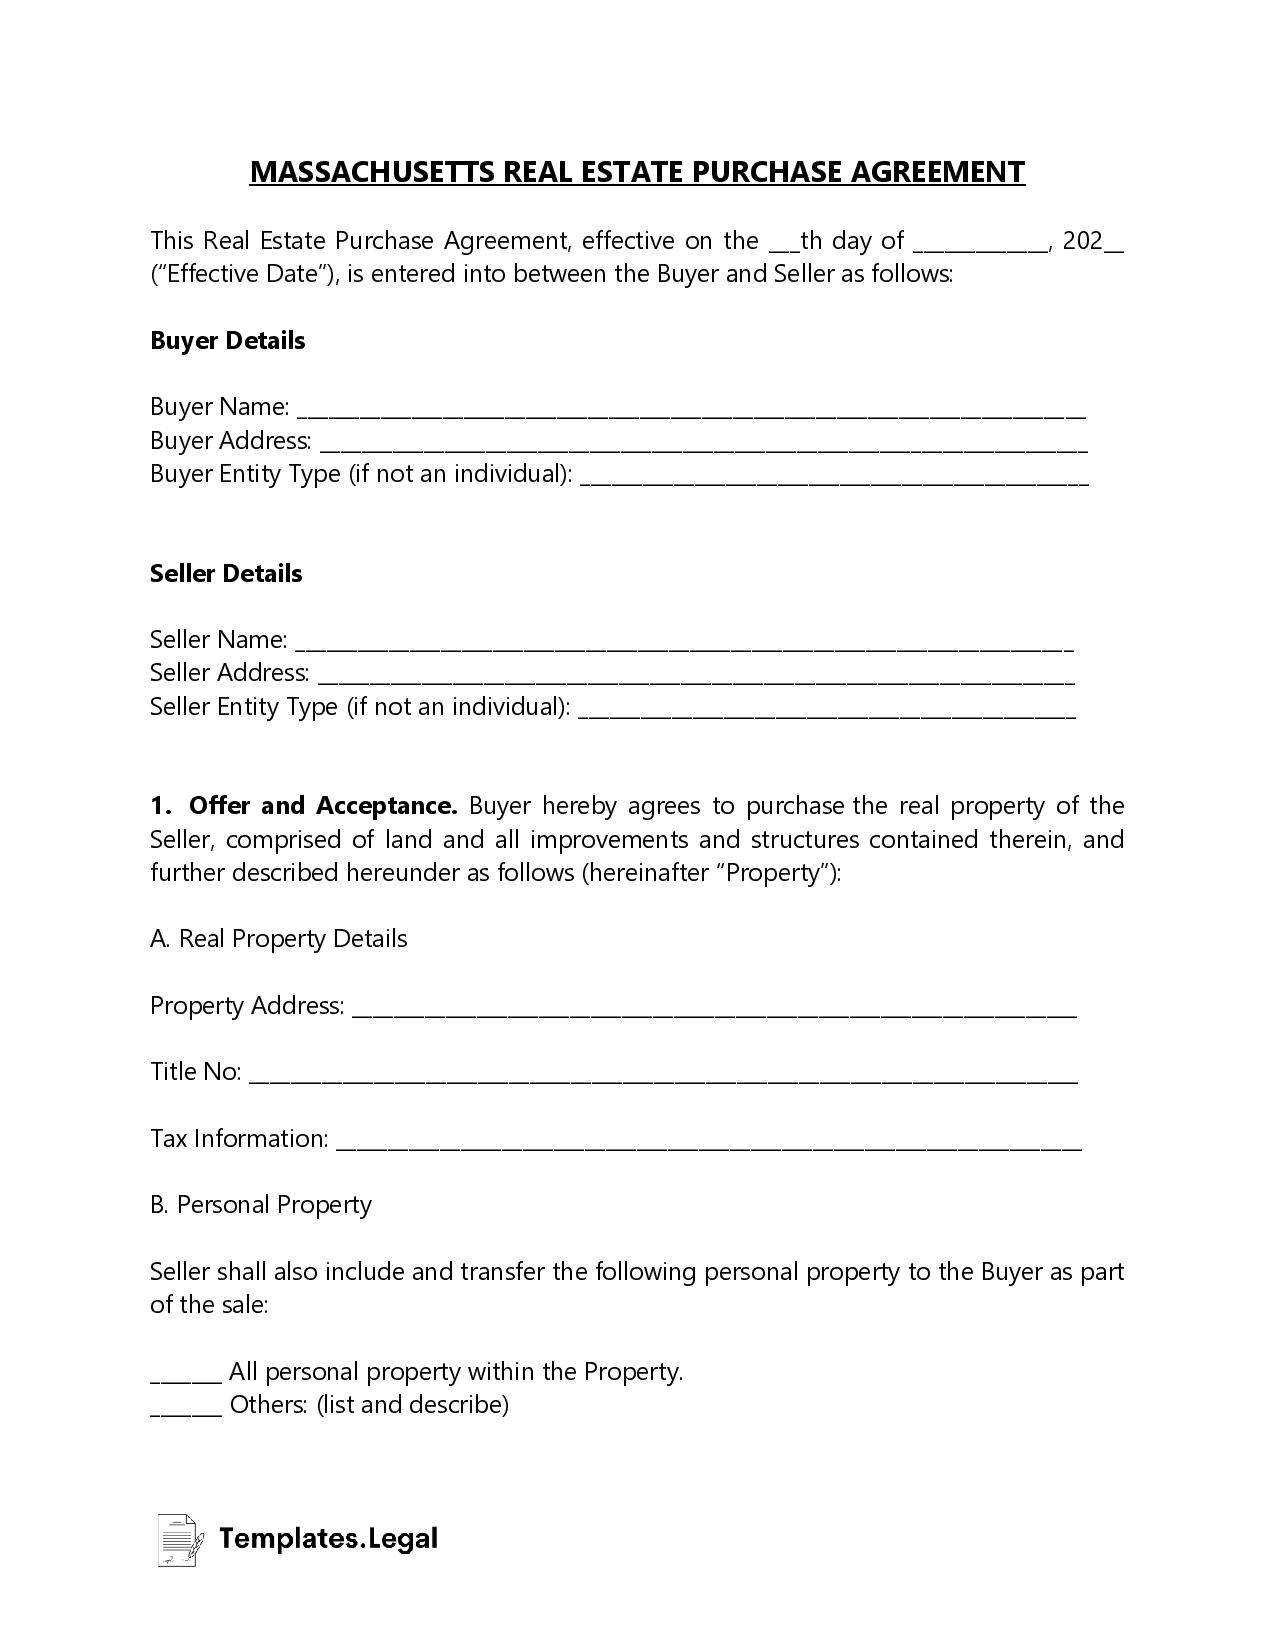 Massachusetts Real Estate Purchase Agreement - Templates.Legal